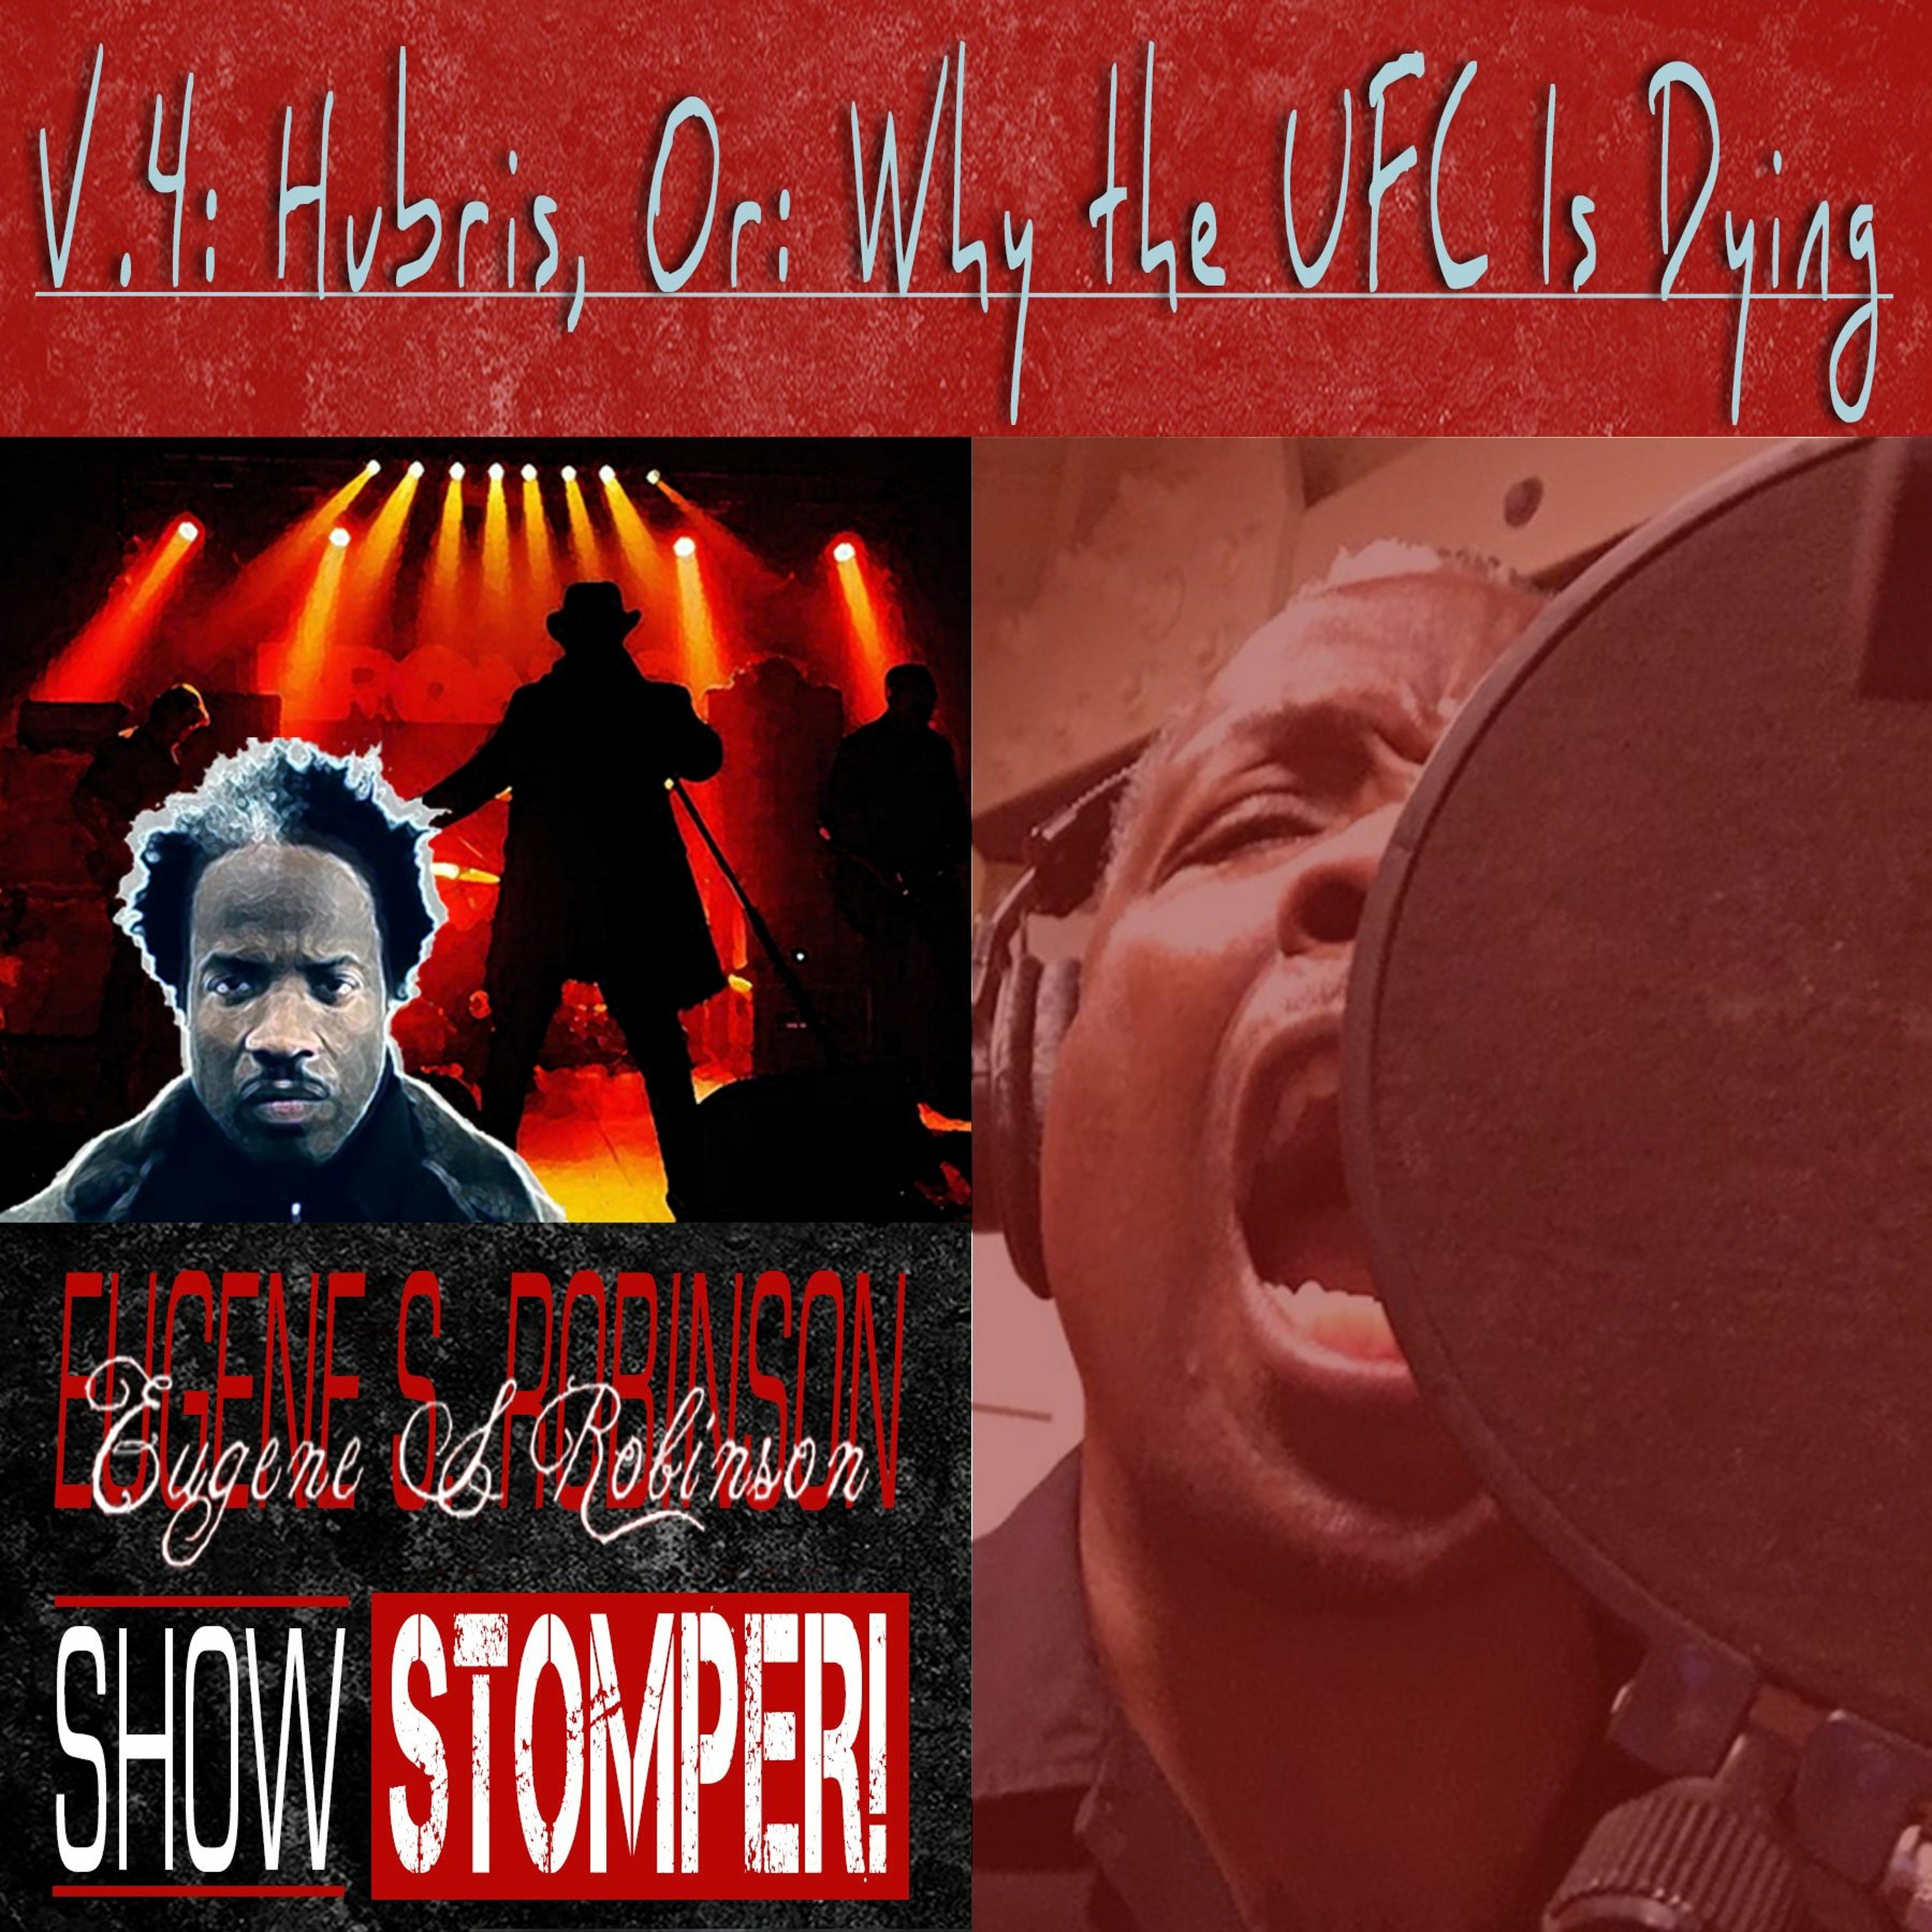 The Eugene S. Robinson Show Stomper! - V.4 Hubris Or, Why The UFC Is Dying?